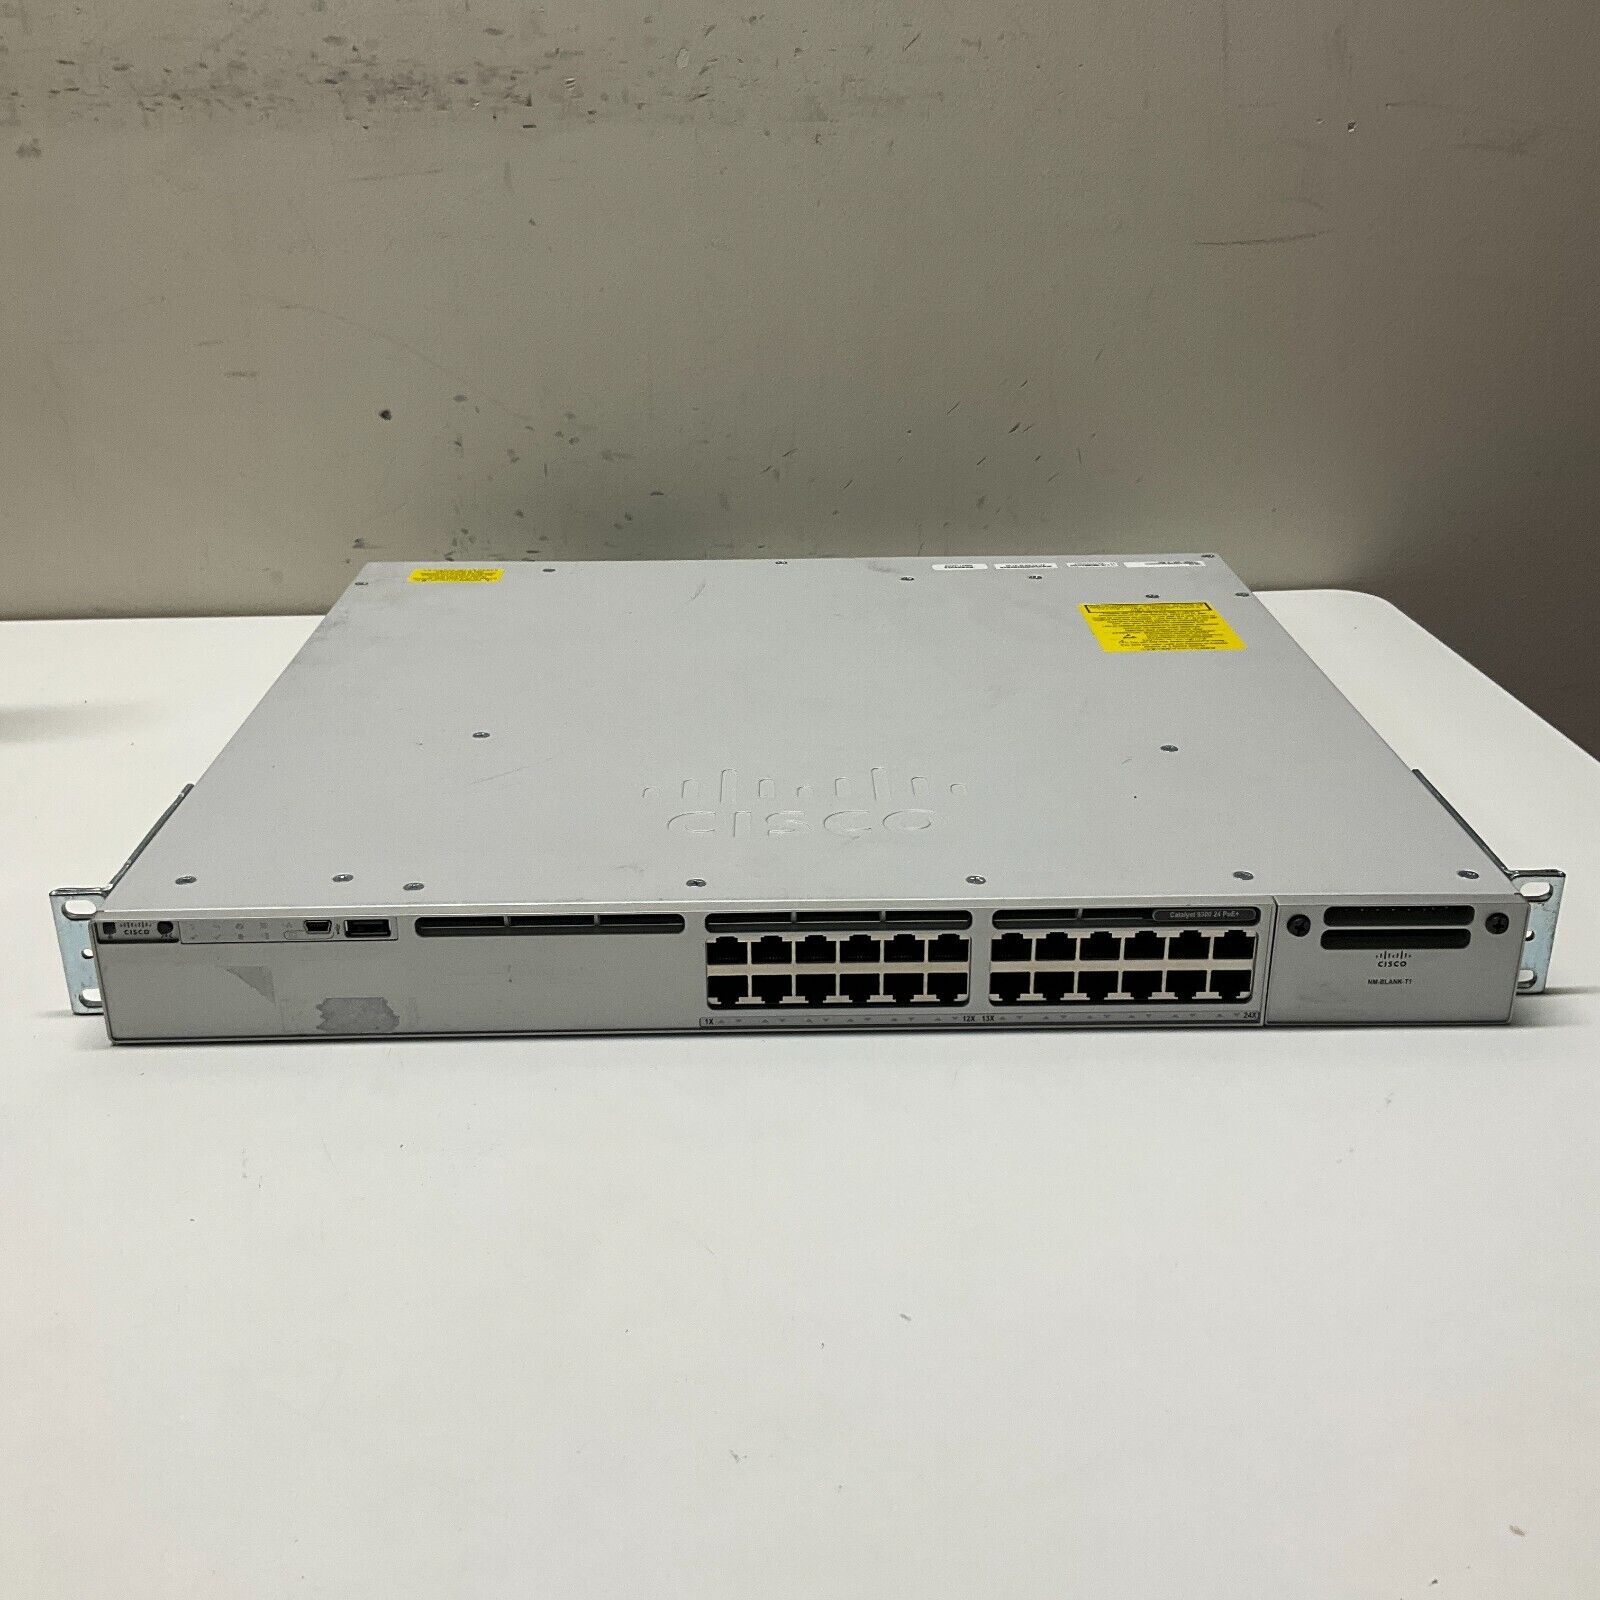 Cisco Catalyst 9300 24 POE+ C9300-24P-E V02 Switch Tested and Working